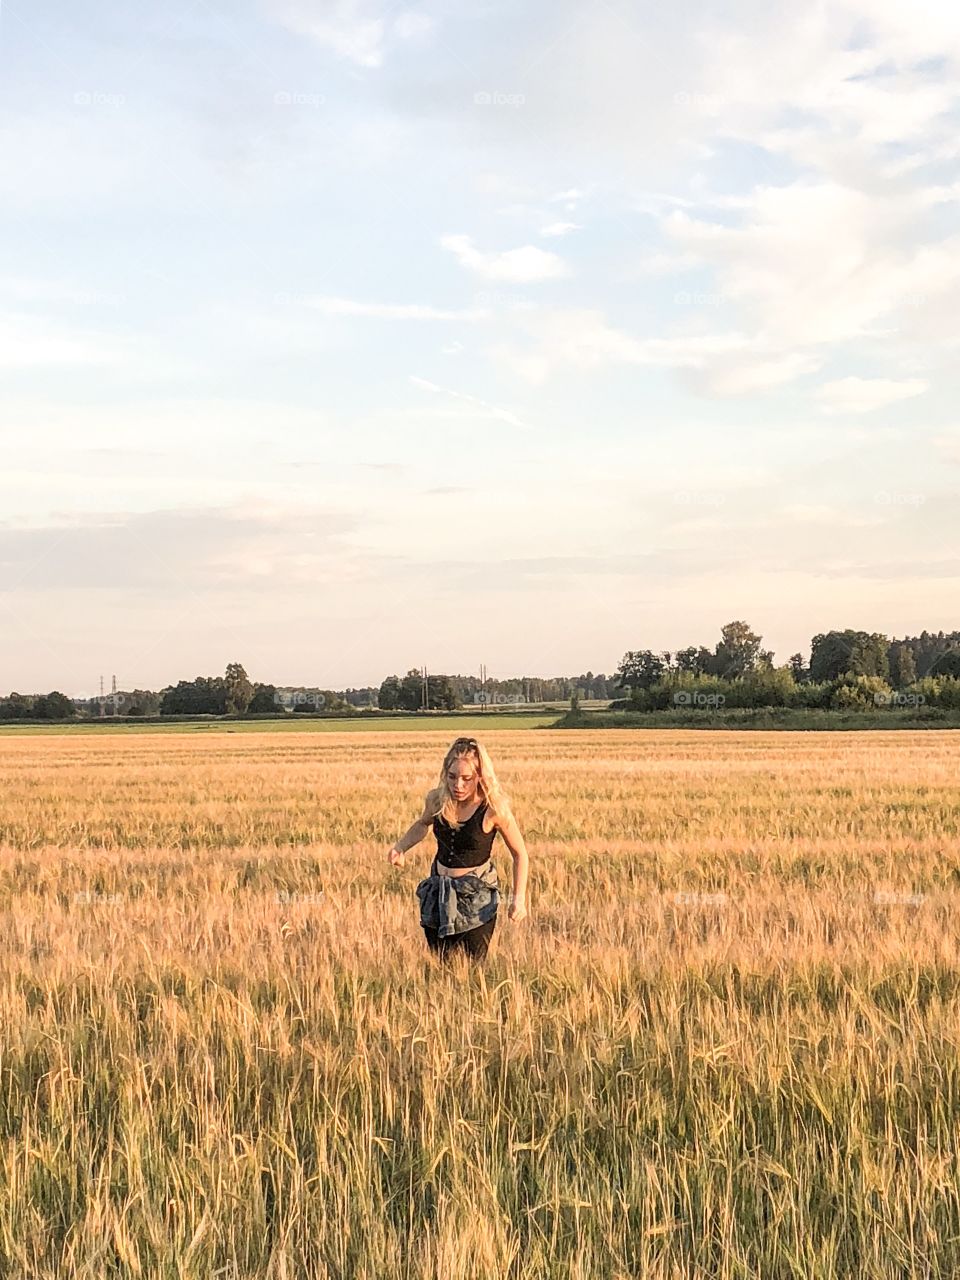 Girl standing in a field of wheat 